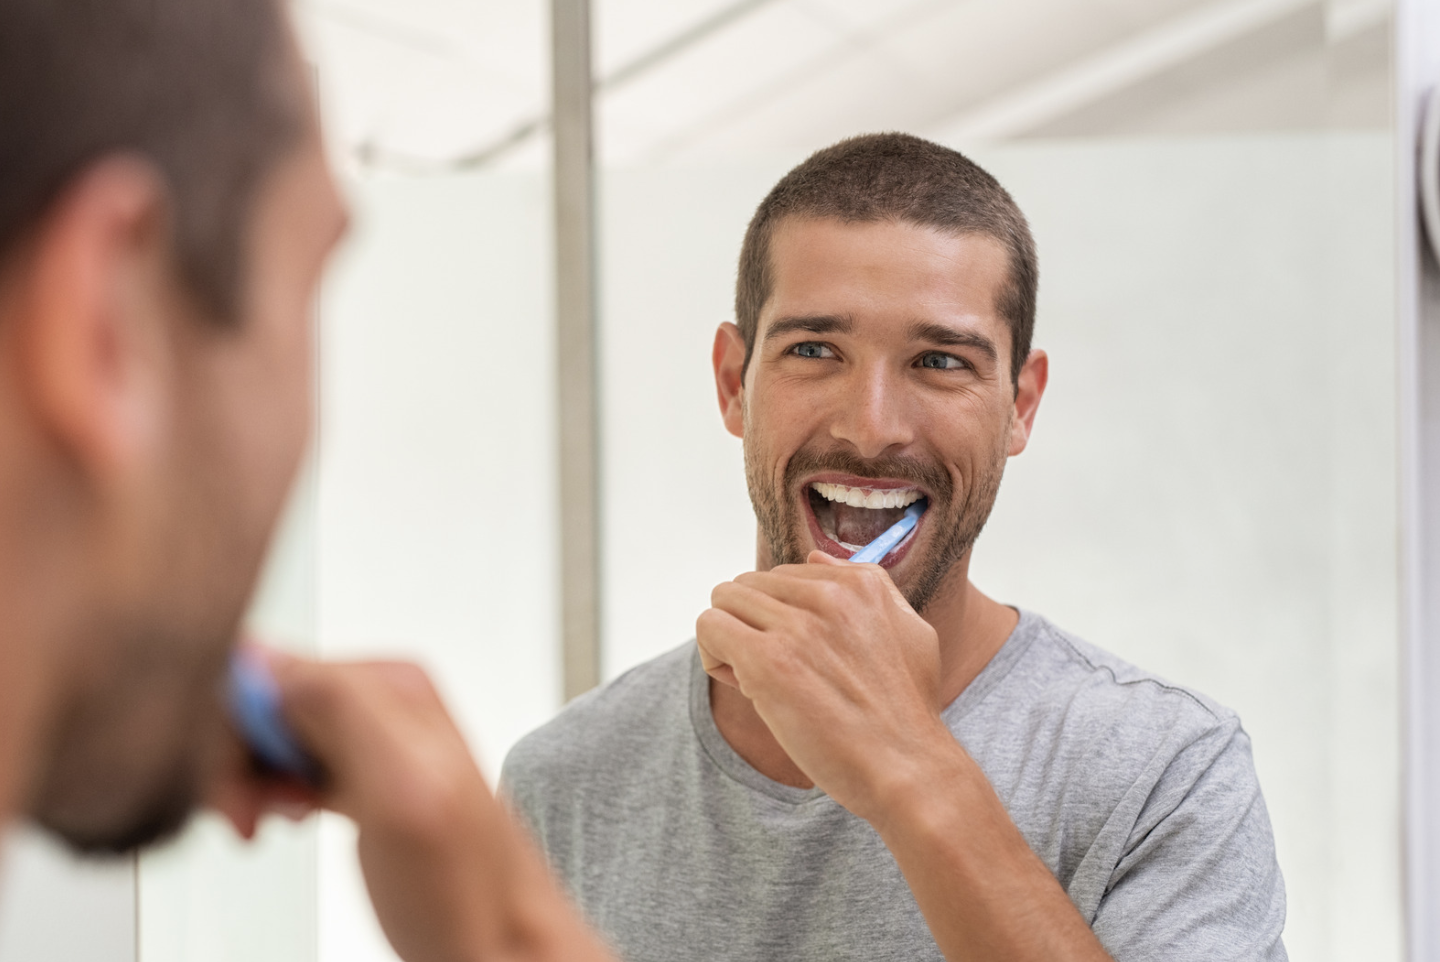 10 Simple Ways to Maintain Clean and Healthy Teeth